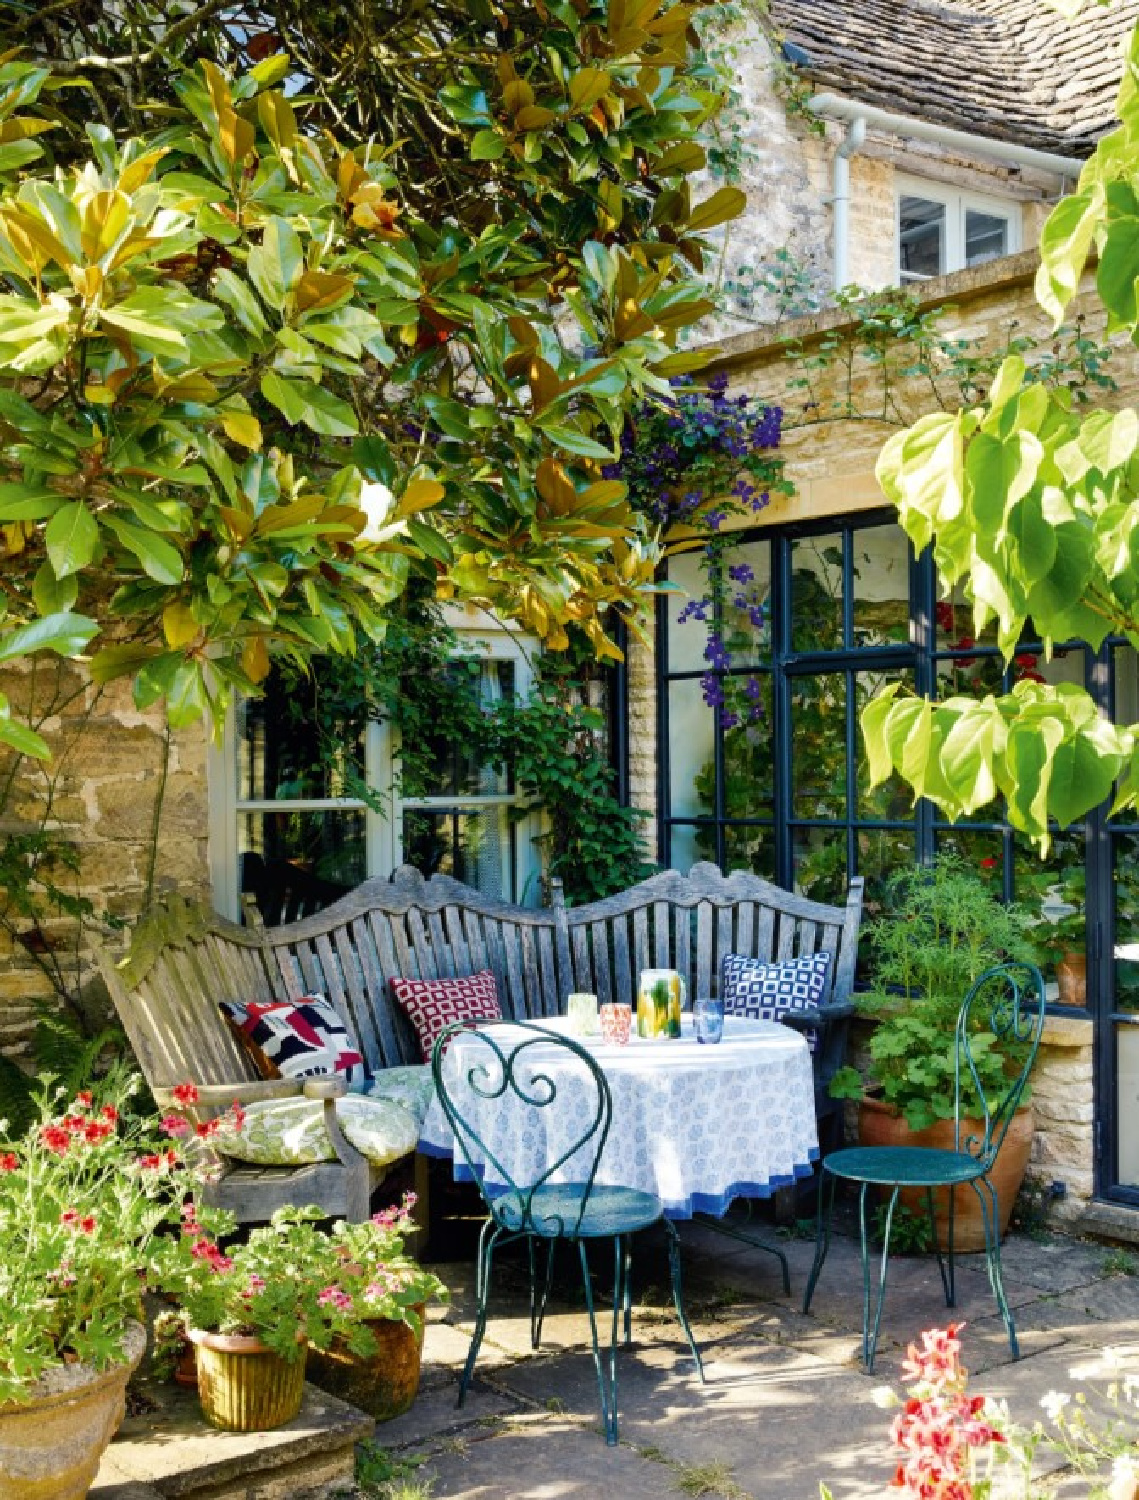 Beautiful garden at Cotswold home of Renshaw and Sarah Hiscox in HouseandGardenUK (photo Paul Massey). #cotswoldcottage #englishcountrystyle